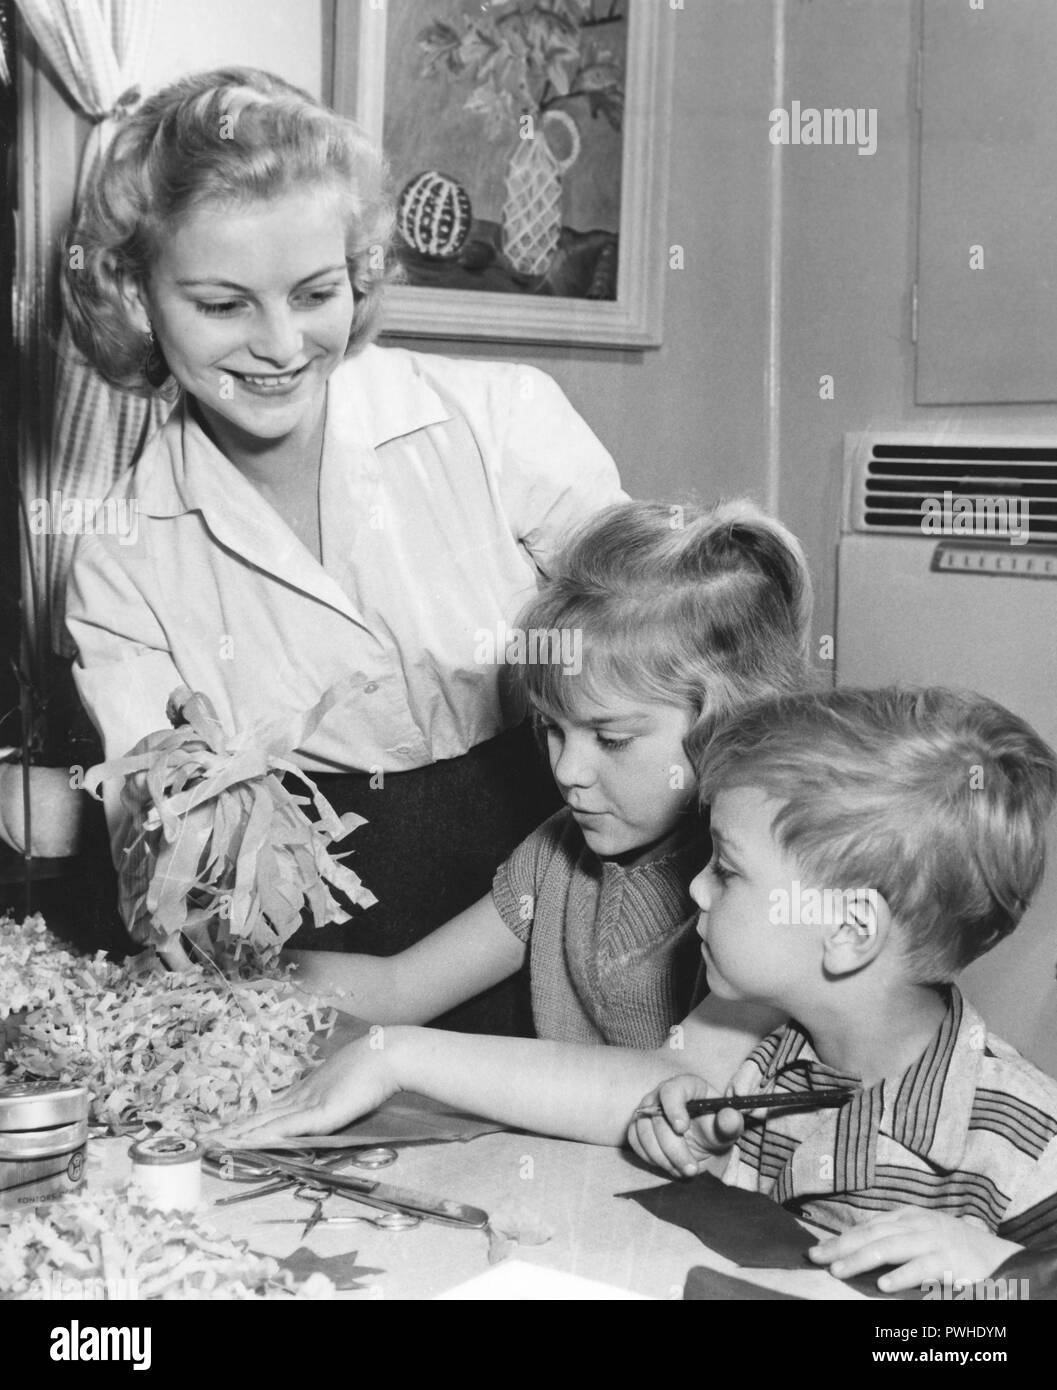 Christmas in the 1950s. Anita Björklund who is chosen to be Stockholms Lucia 1957, is christmas decorating with her younger sister and brother. Stock Photo